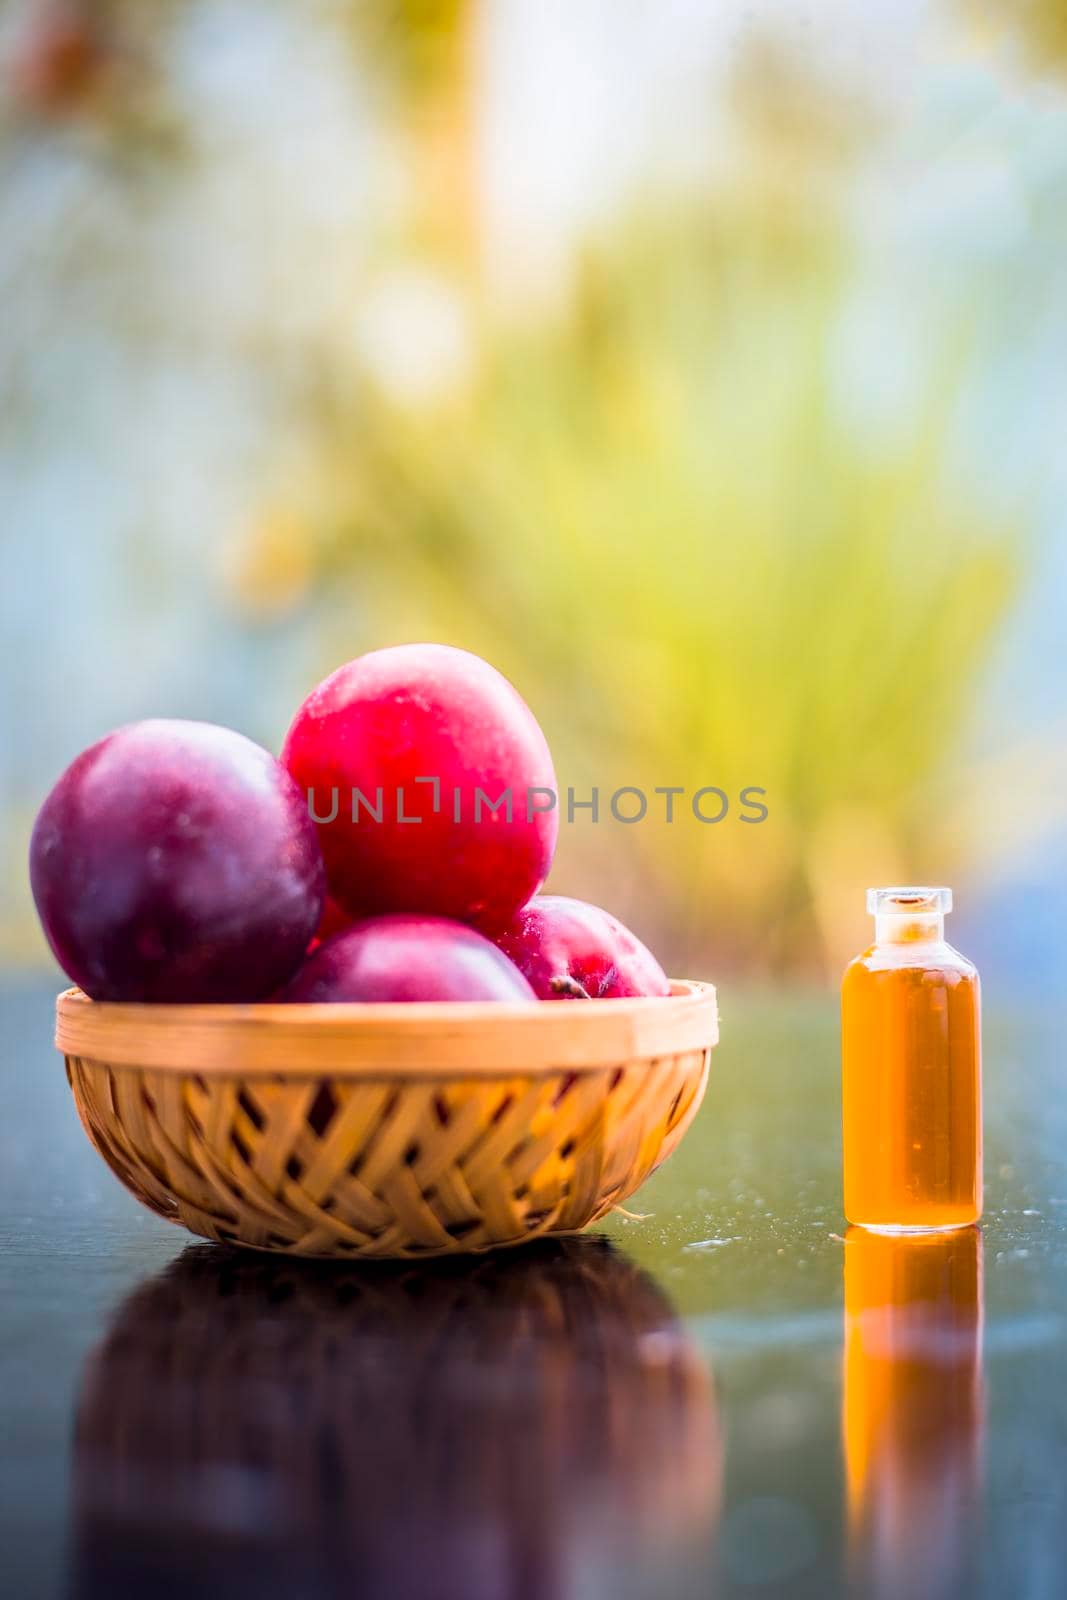 Raw organic red ripe plums in a brown-colored basket on the wooden surface along with its extracted essential oil in a small transparent bottle with blurred background.